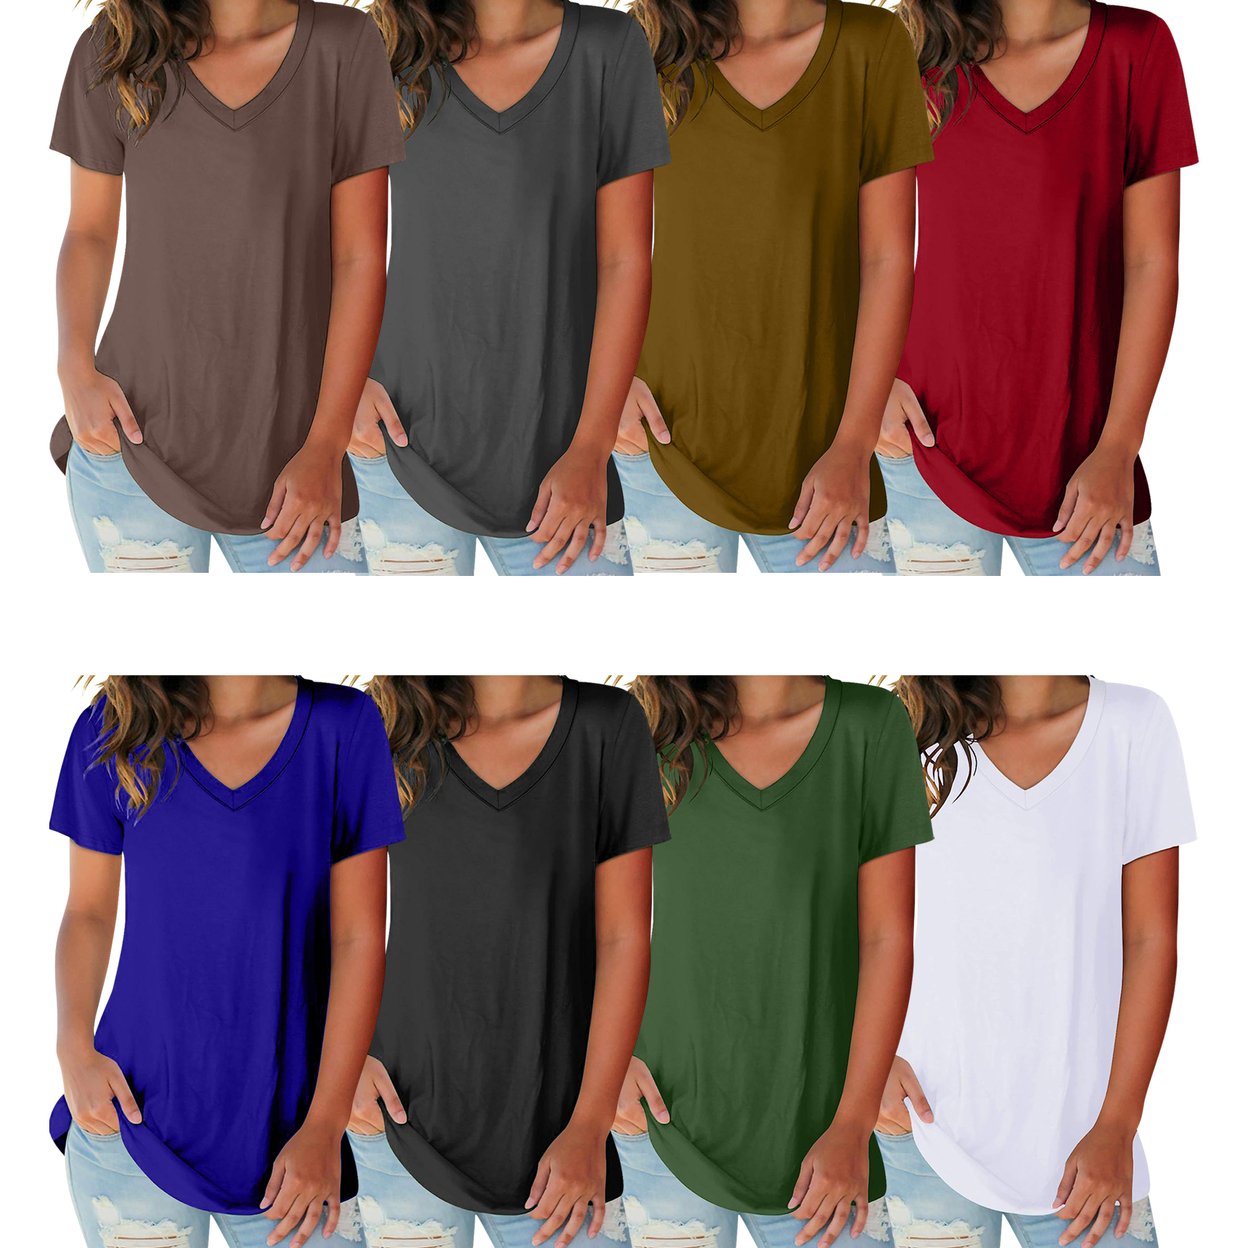 Women's Ultra-Soft Smooth Cotton Blend Basic V-Neck Short Sleeve Shirts - Brown, Small